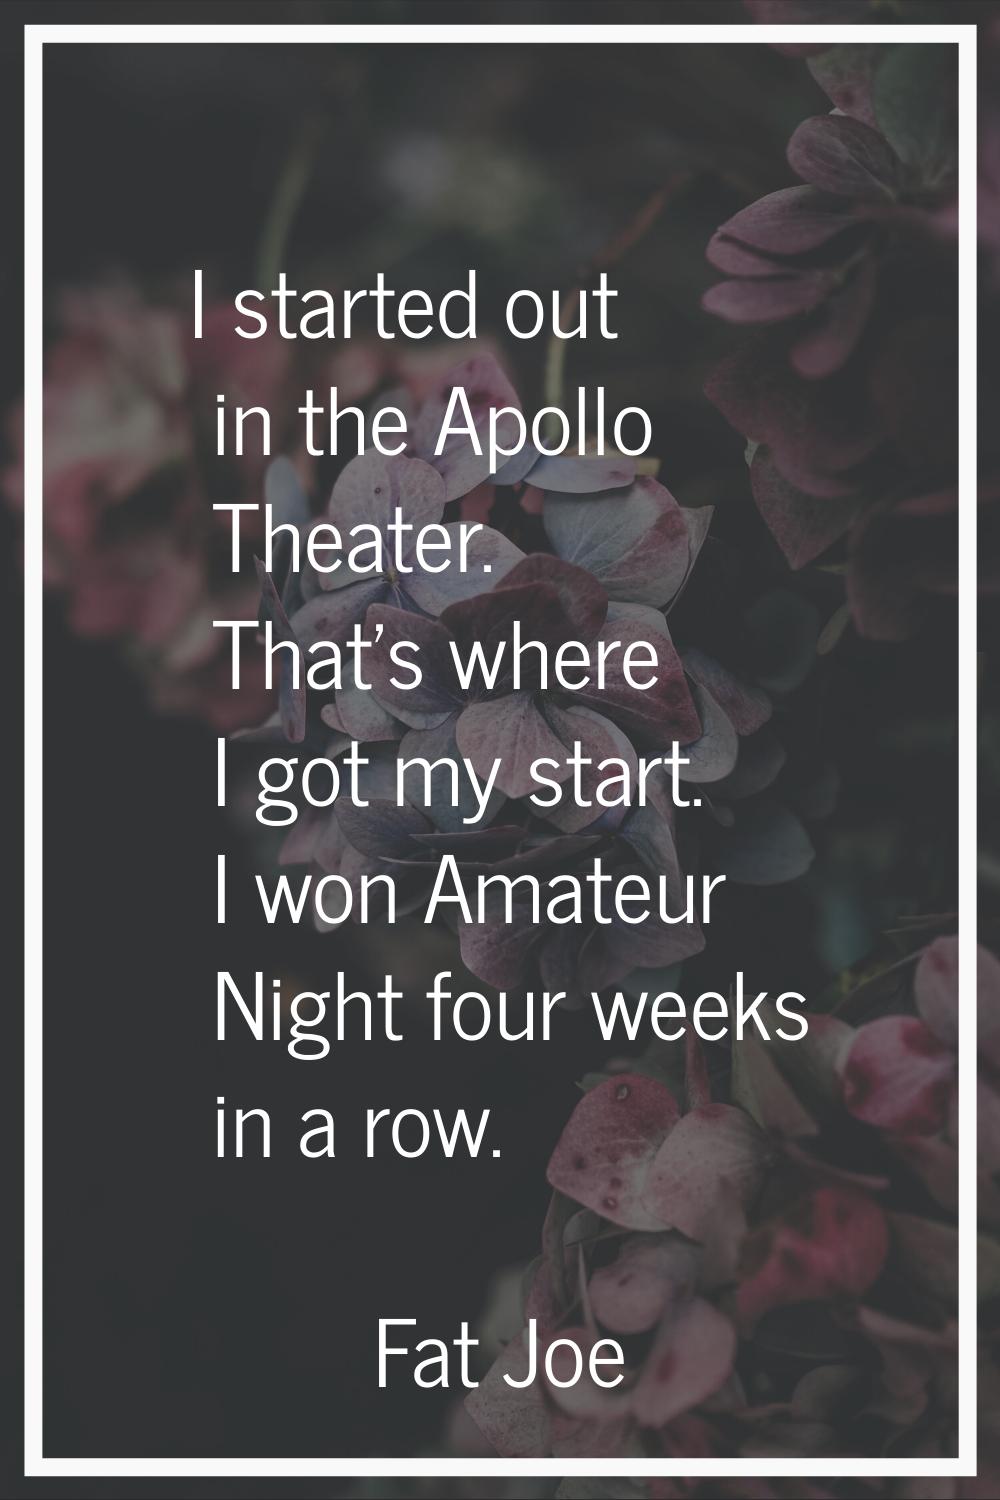 I started out in the Apollo Theater. That's where I got my start. I won Amateur Night four weeks in